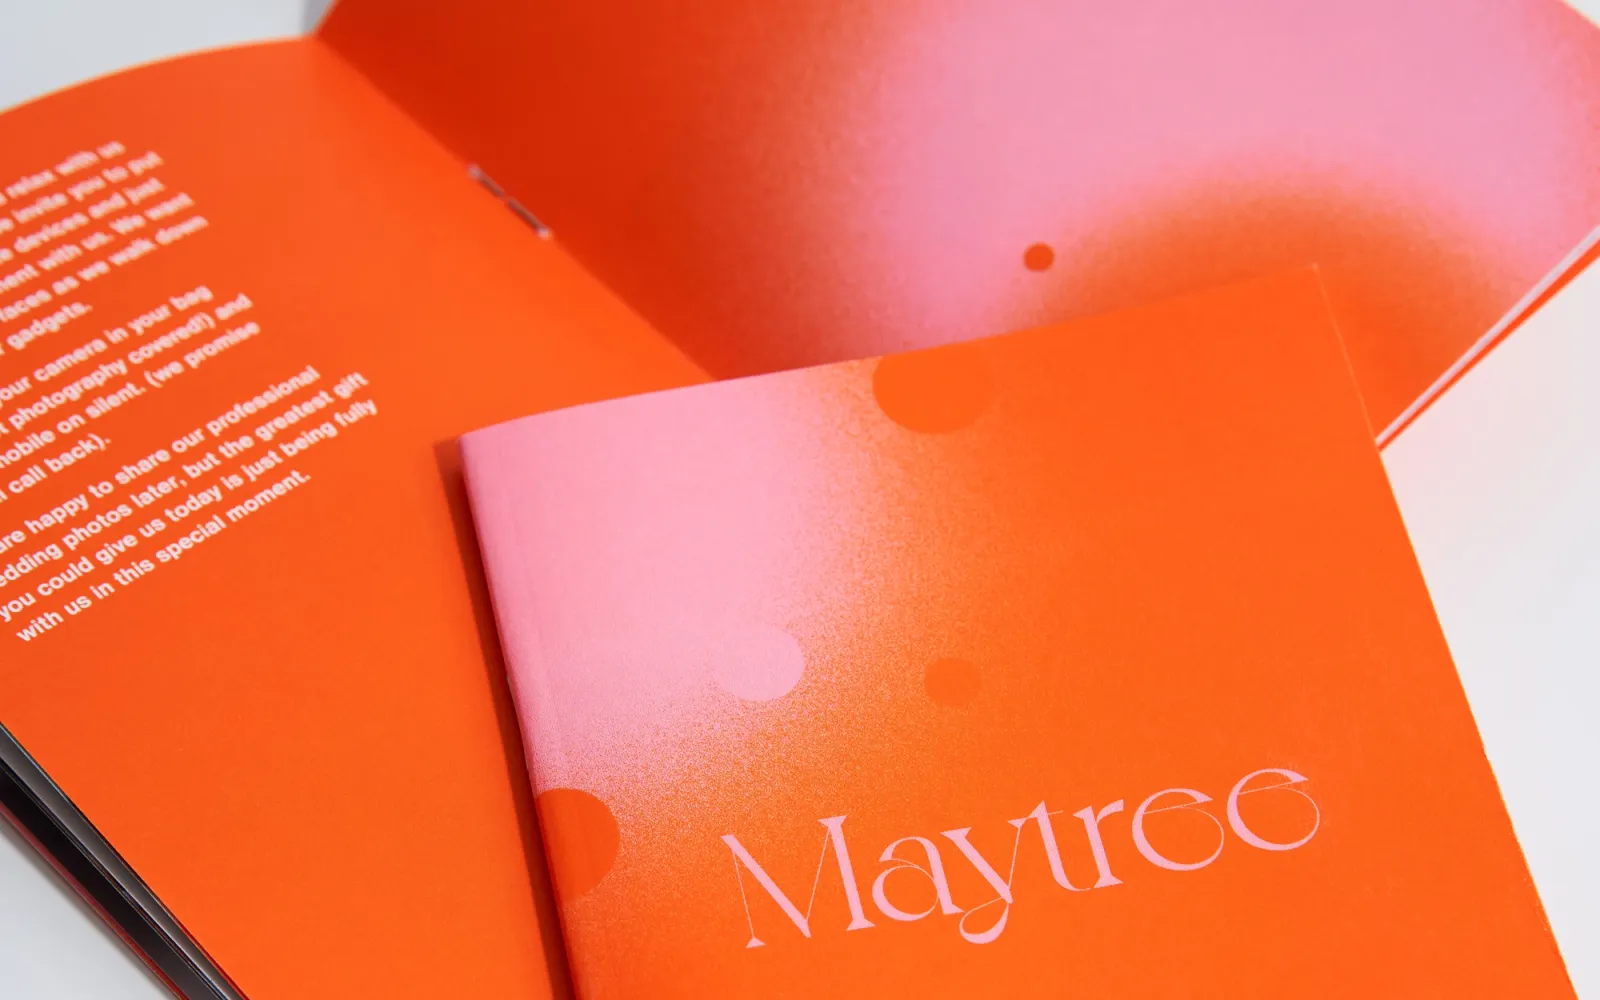 Maytree Photography — Branding